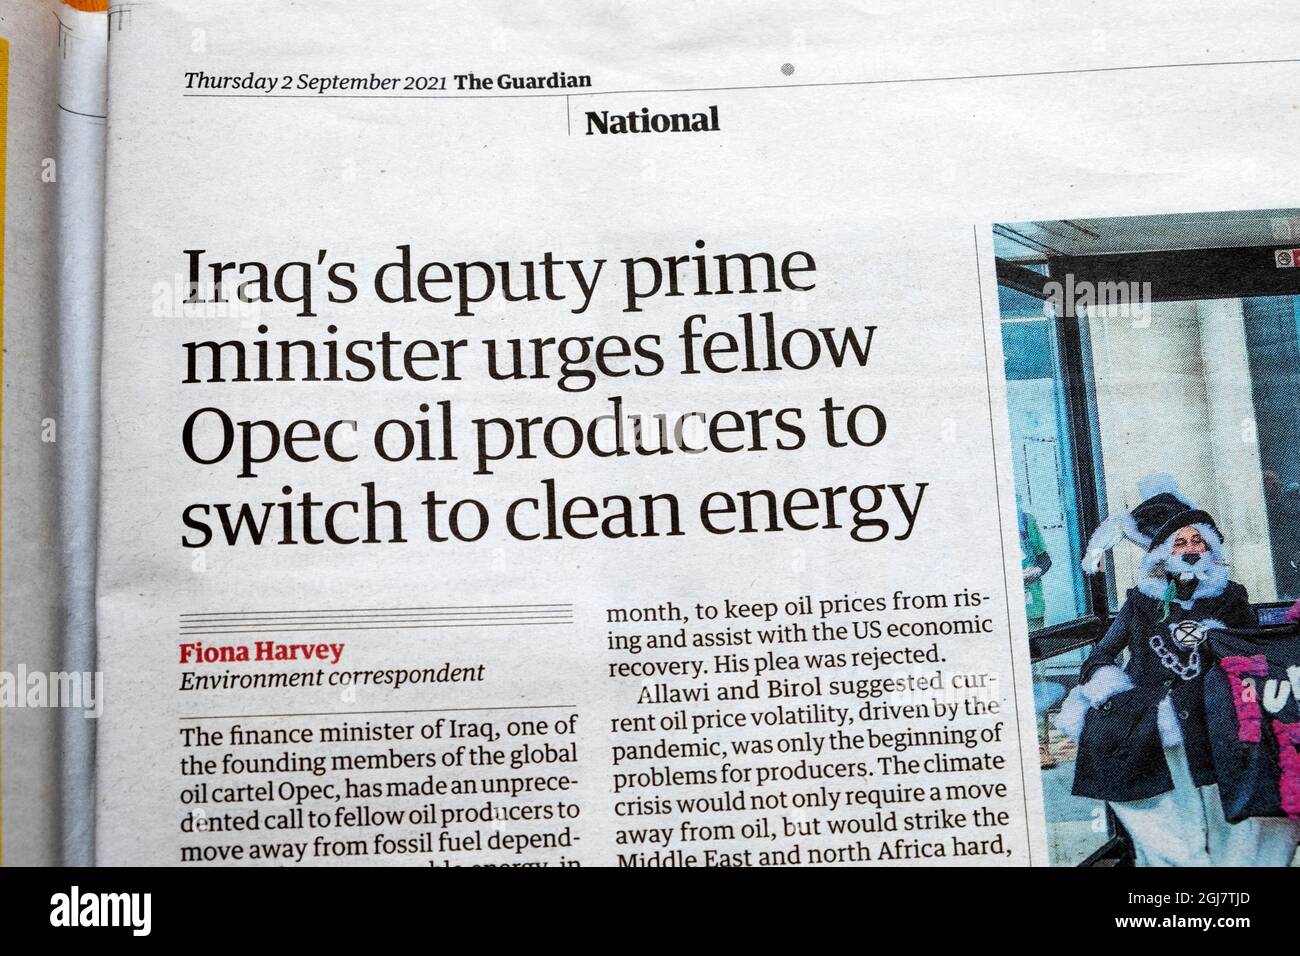 'Iraq's deputy prime minister urges fellow Opec oil producers to switch to clean energy' Guardian newspaper headline article September 2021 London UK Stock Photo